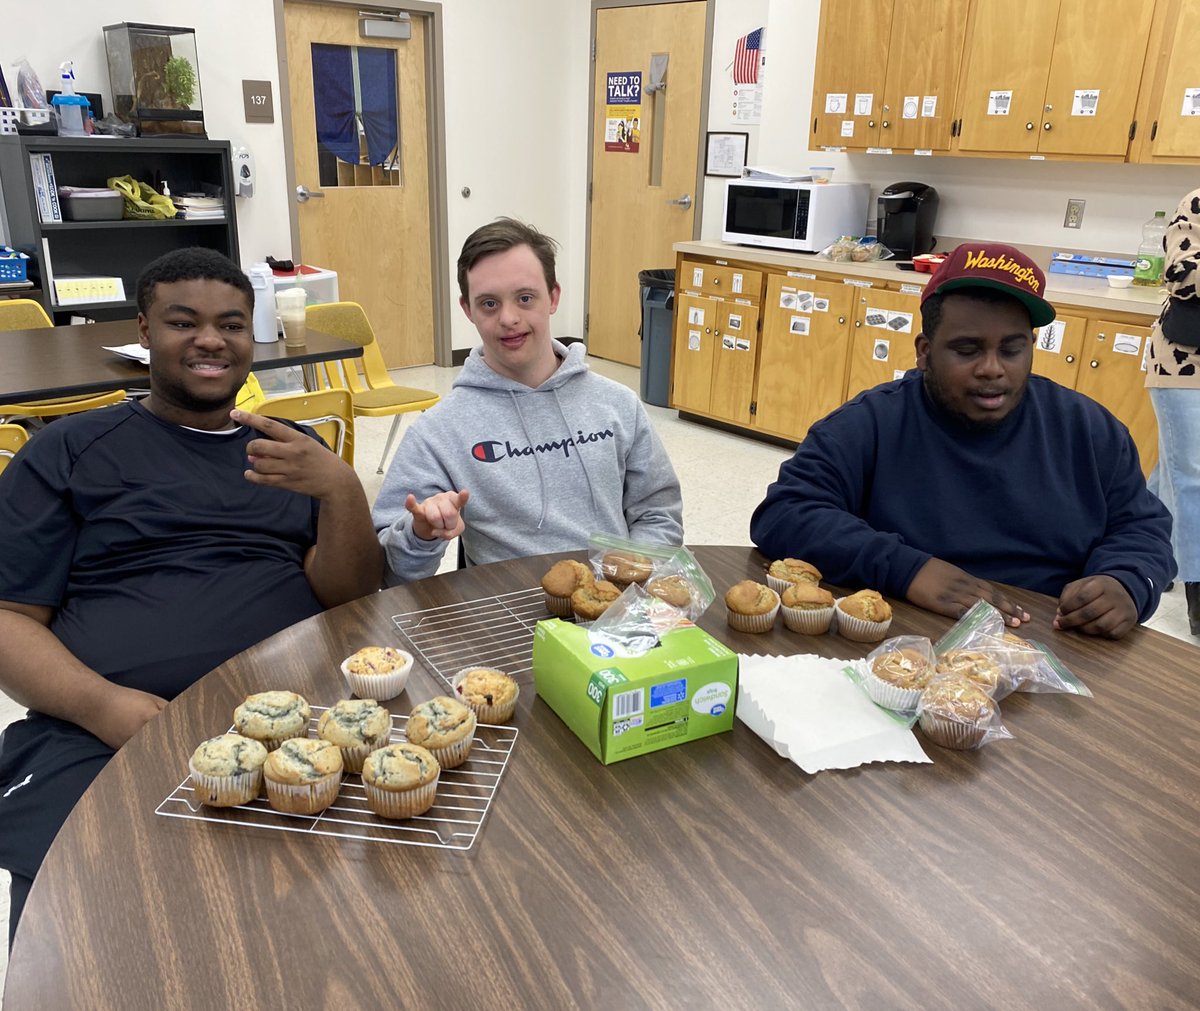 Get ready @FCPSMaryland Central Office… these SUCCESS students worked hard baking muffins for tomorrow’s Coffee Shop!! #fcpstogether #fcpssuccess #coffeeshop